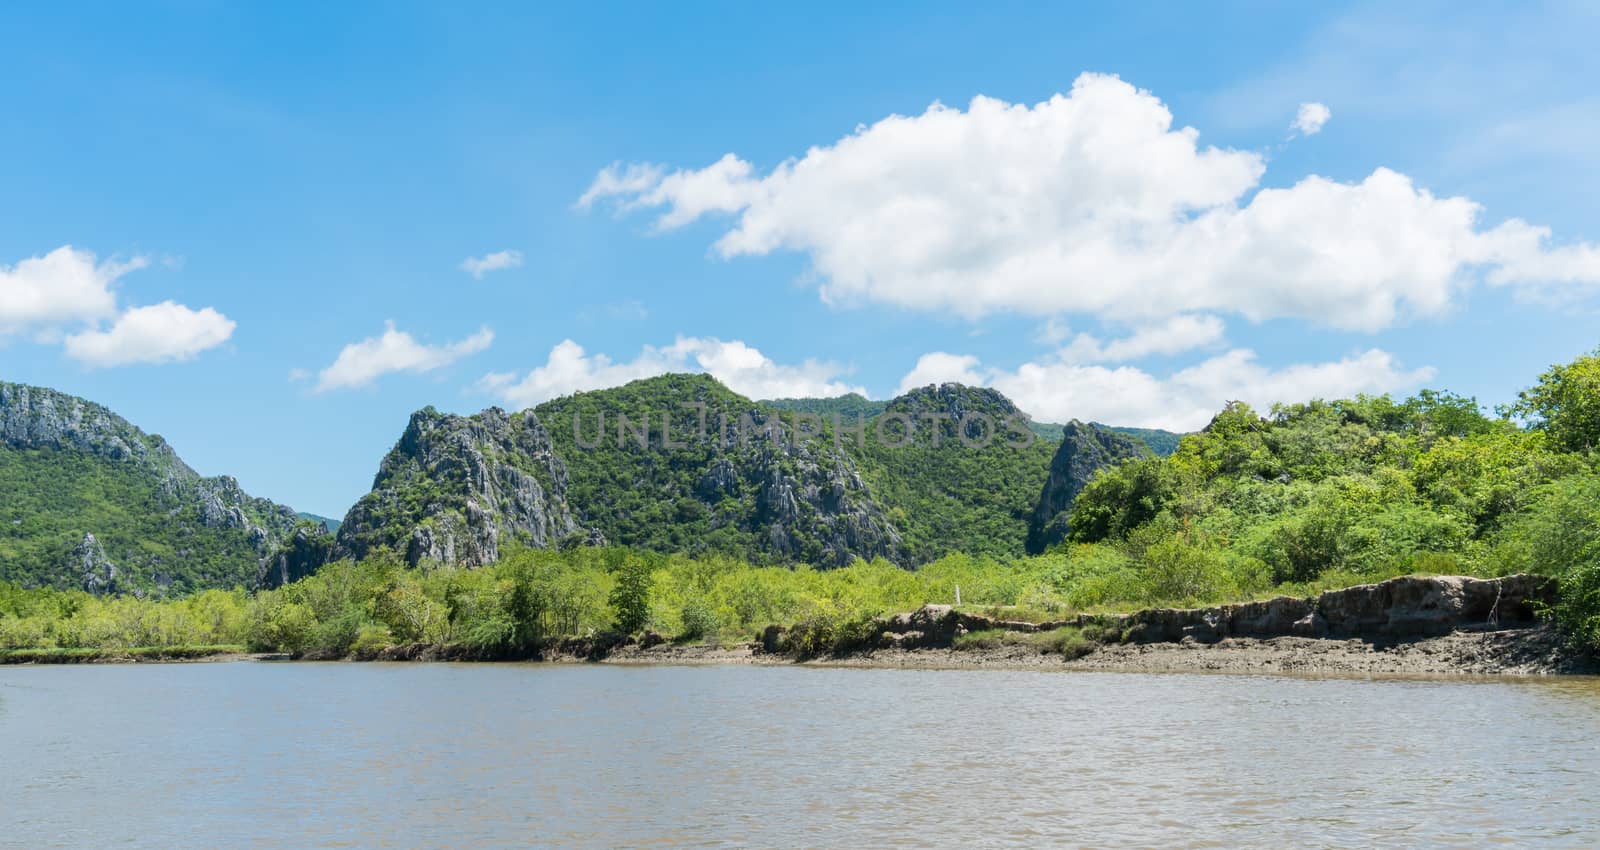 Stone or rock mountain or hill with green tree and blue sky and water and cloud at Khao Dang canal Prachuap Khiri Khan Thailand. Landscape or 
scenery summer concept for boat trip